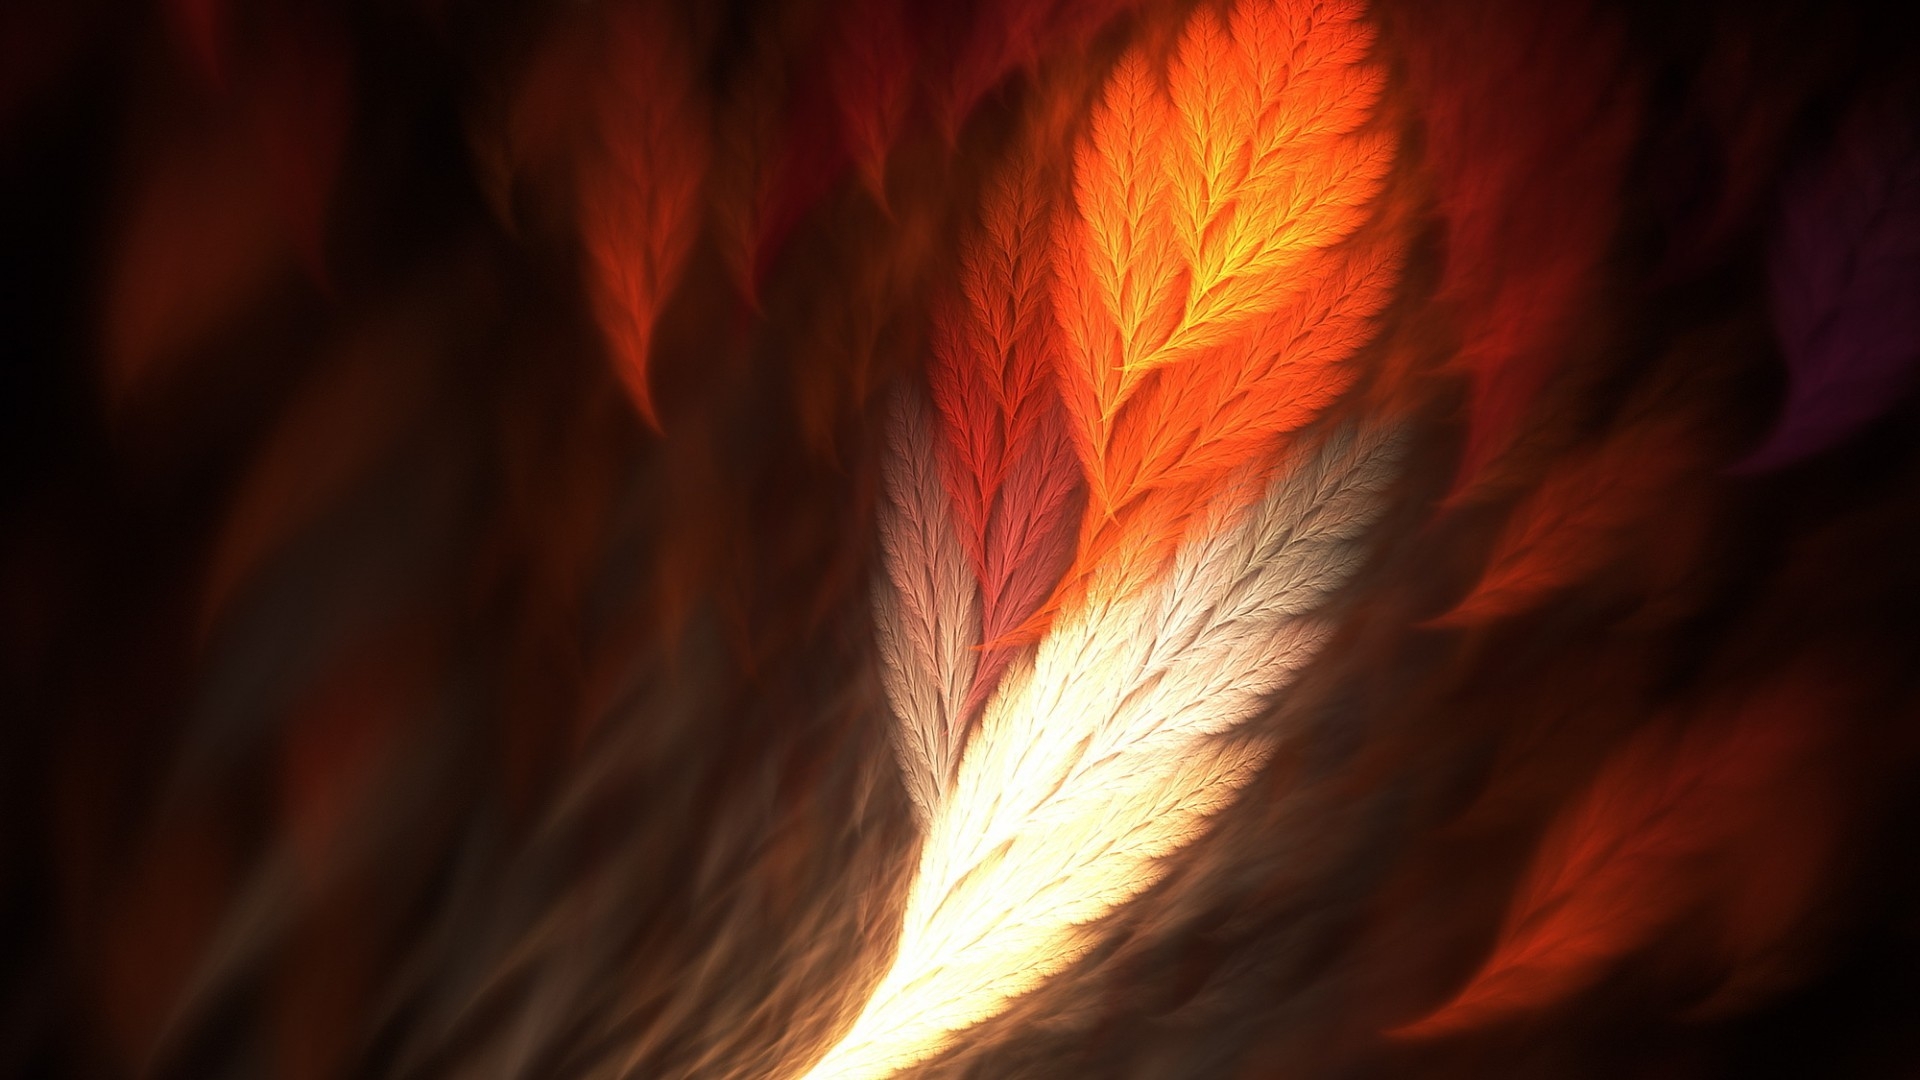 Feather Art for 1920 x 1080 HDTV 1080p resolution